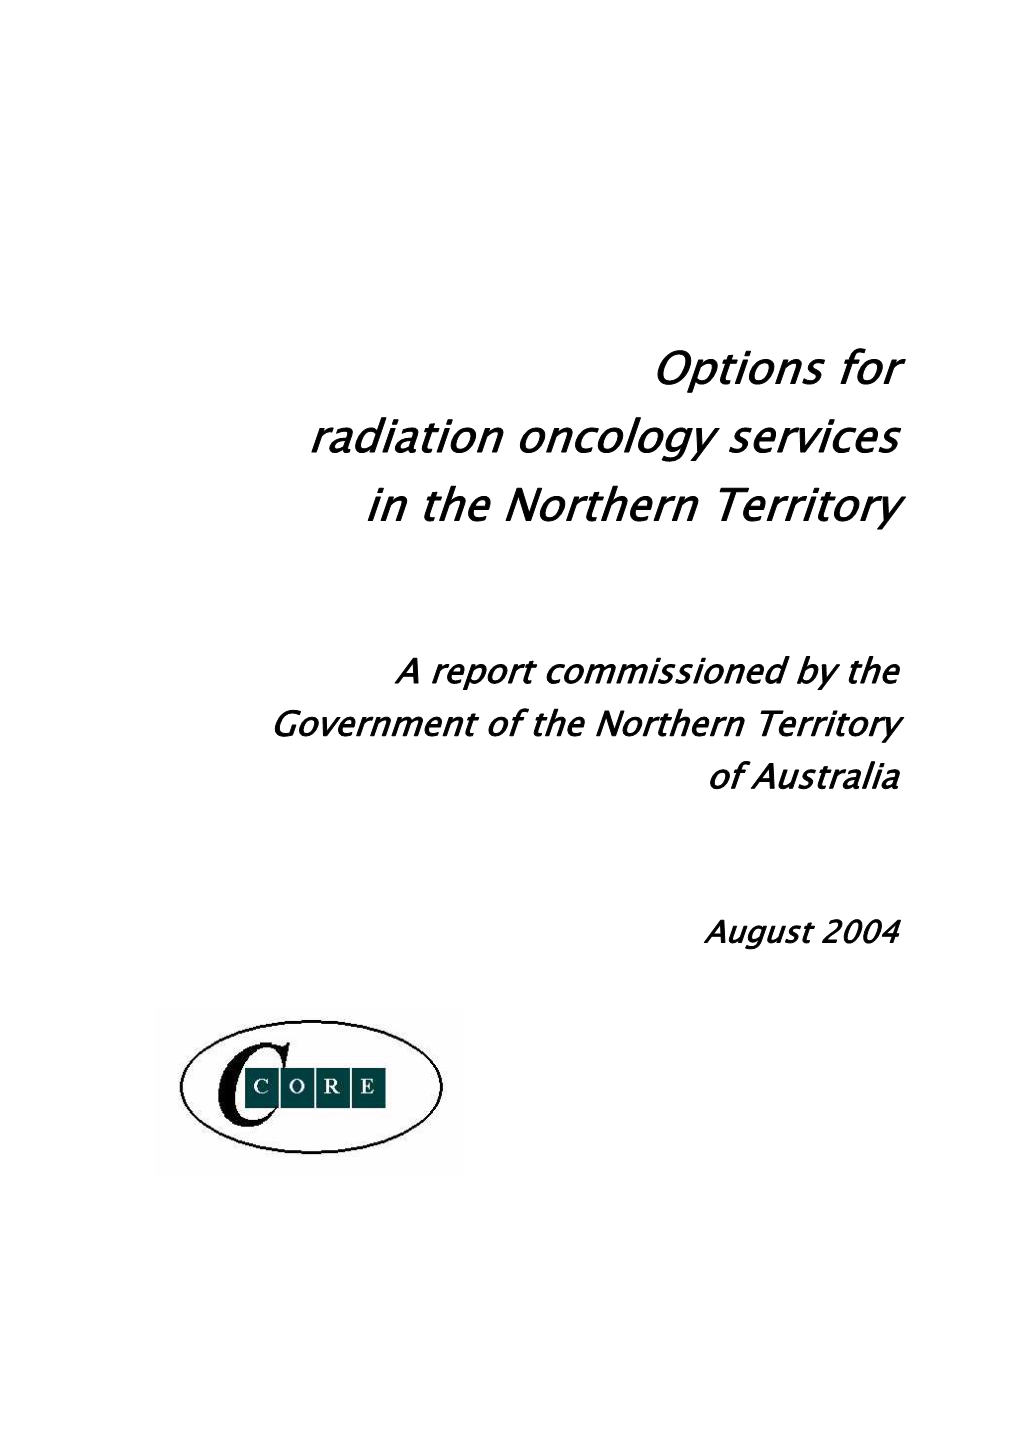 Radiotherapy Services in the NT